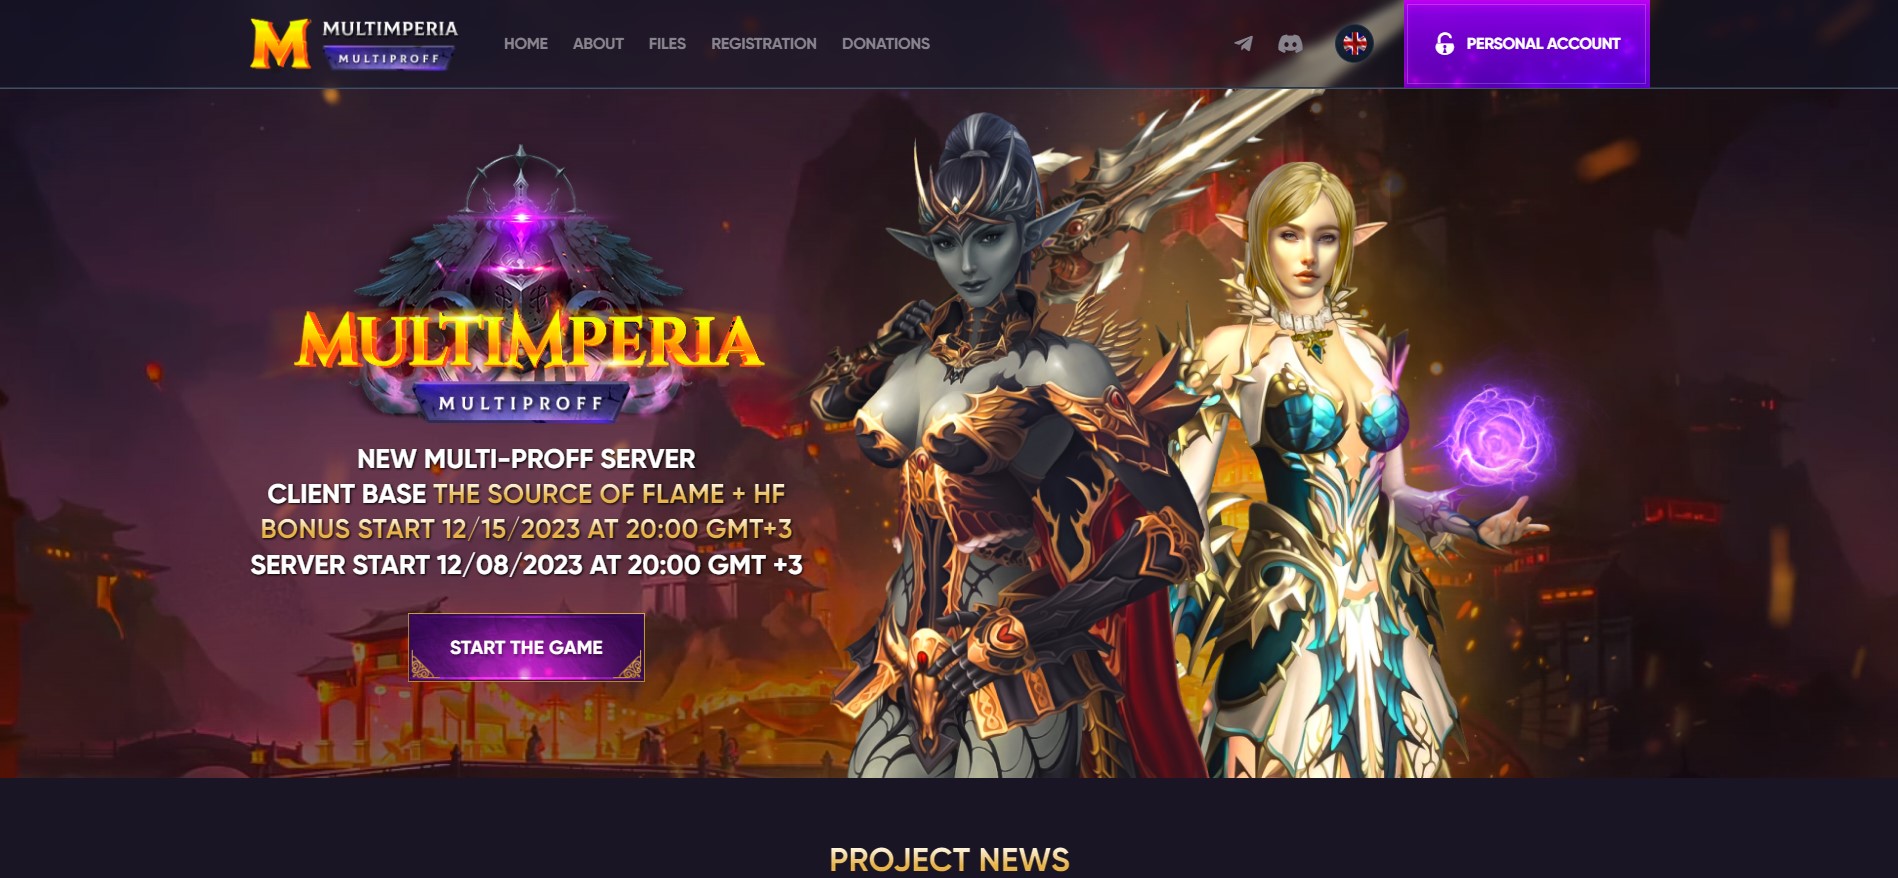 🚀 Multimperia: Immerse yourself in unique Custom Chronicles of Lineage 2 with x5 rates! Conquer your place in the world of Multimperia! ⚔️🌍